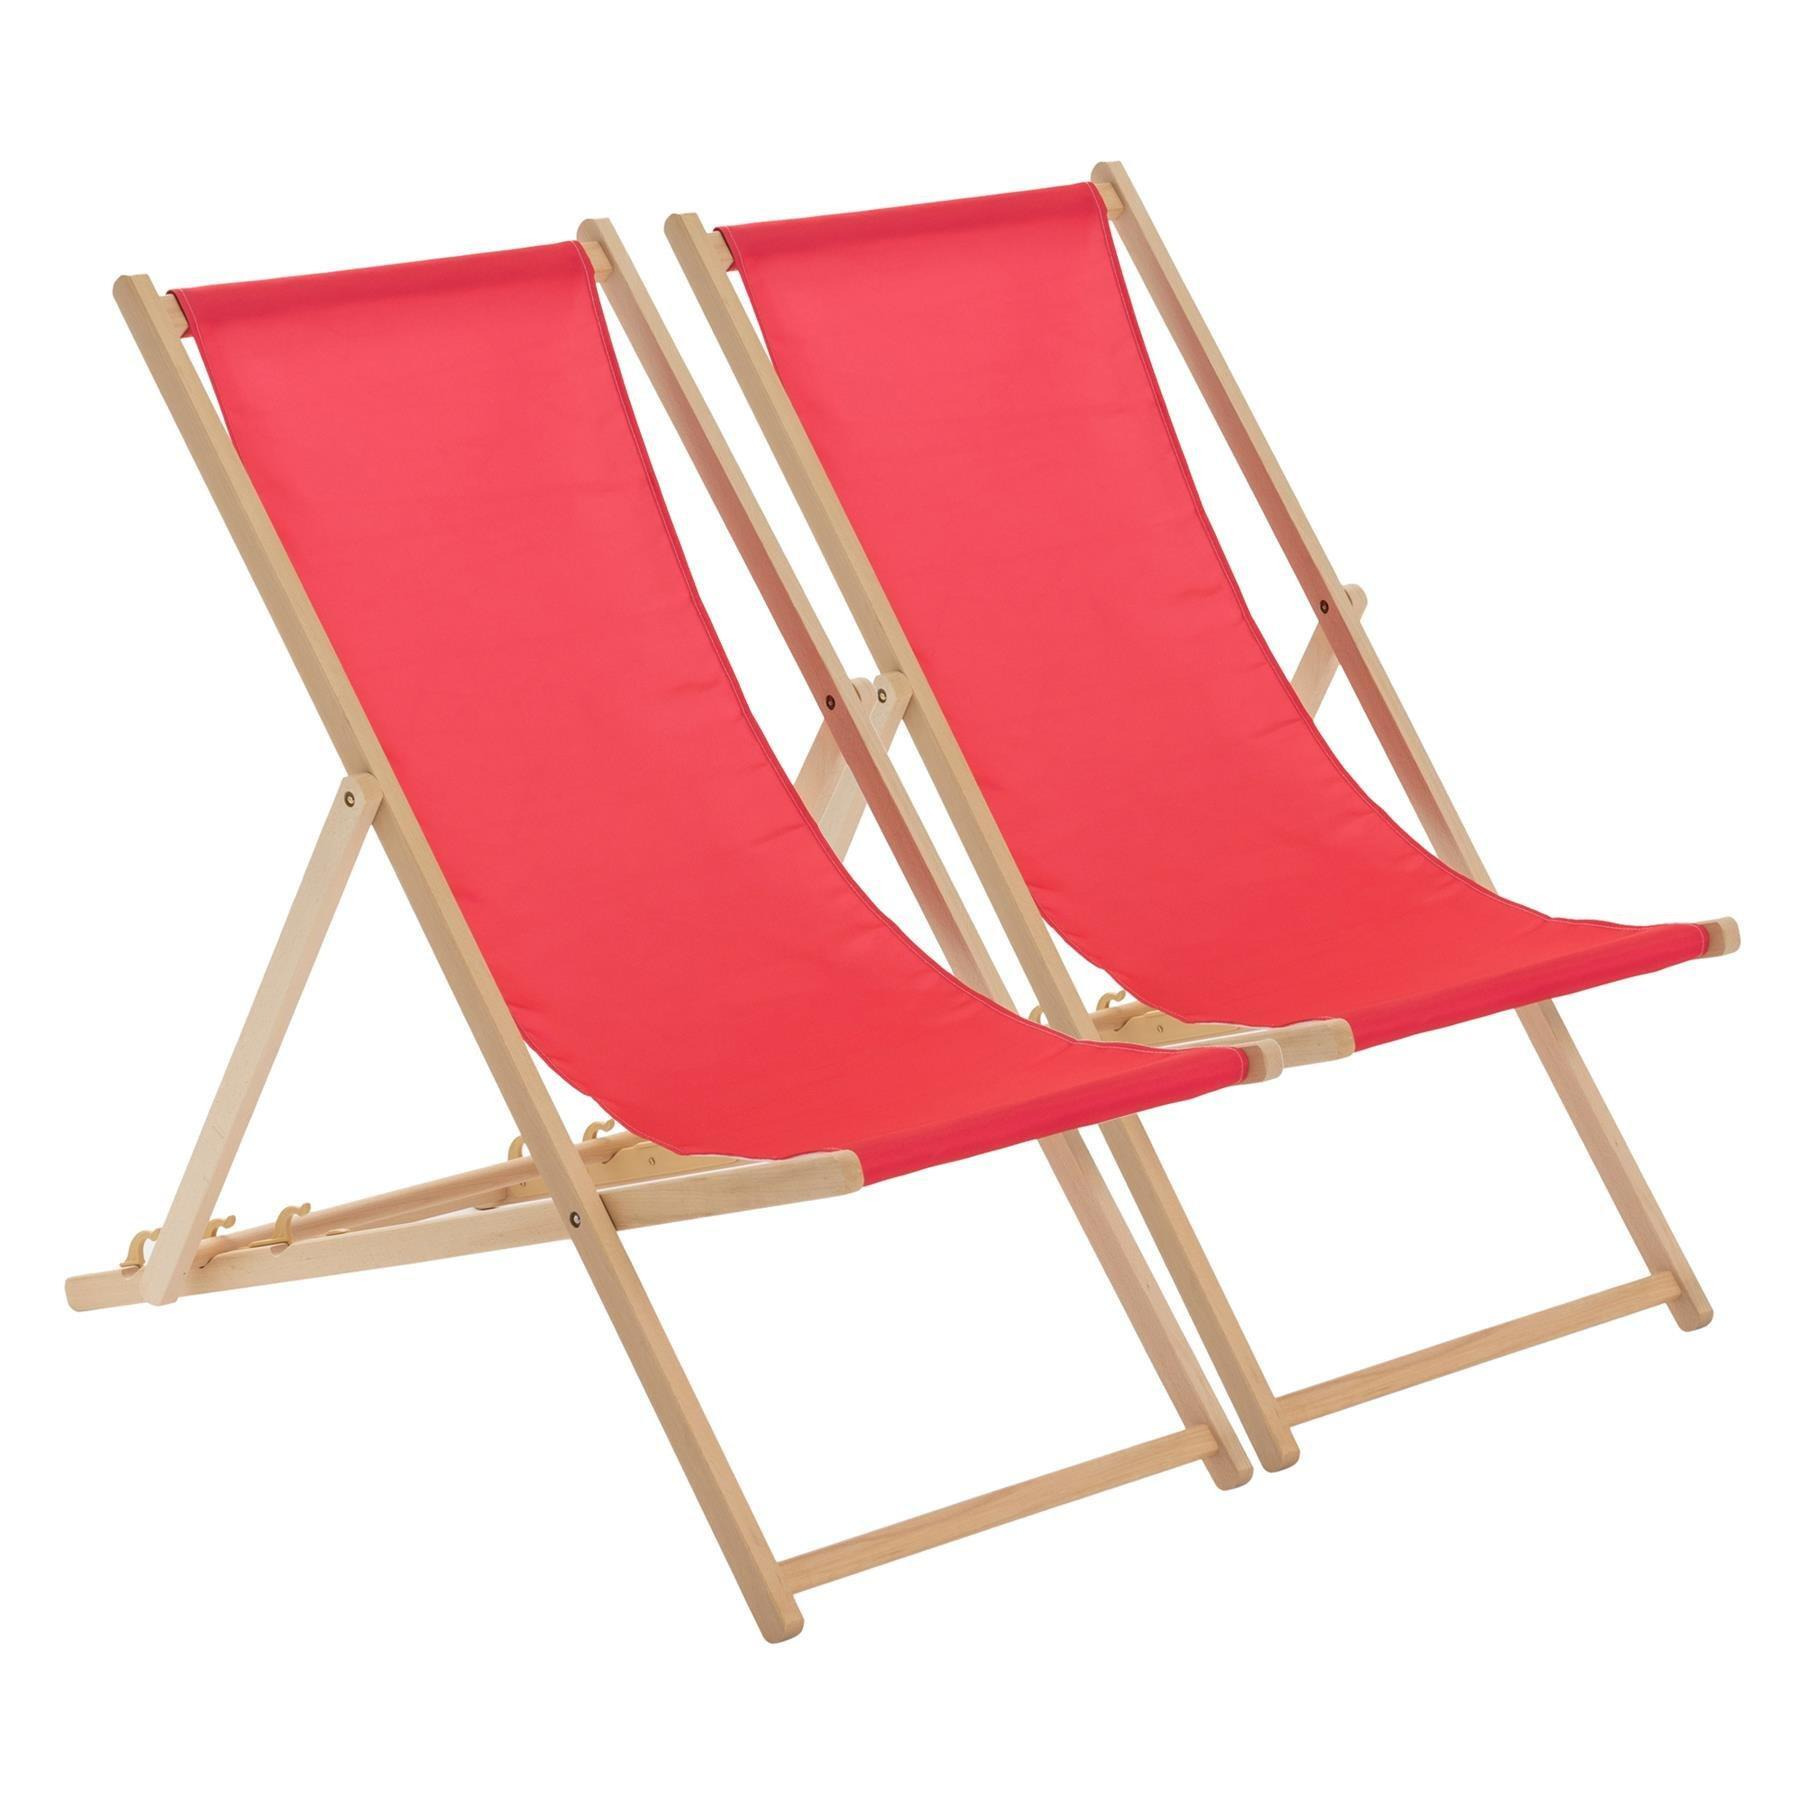 Folding Wooden Deck Chairs Pink Pack of 2 - image 1